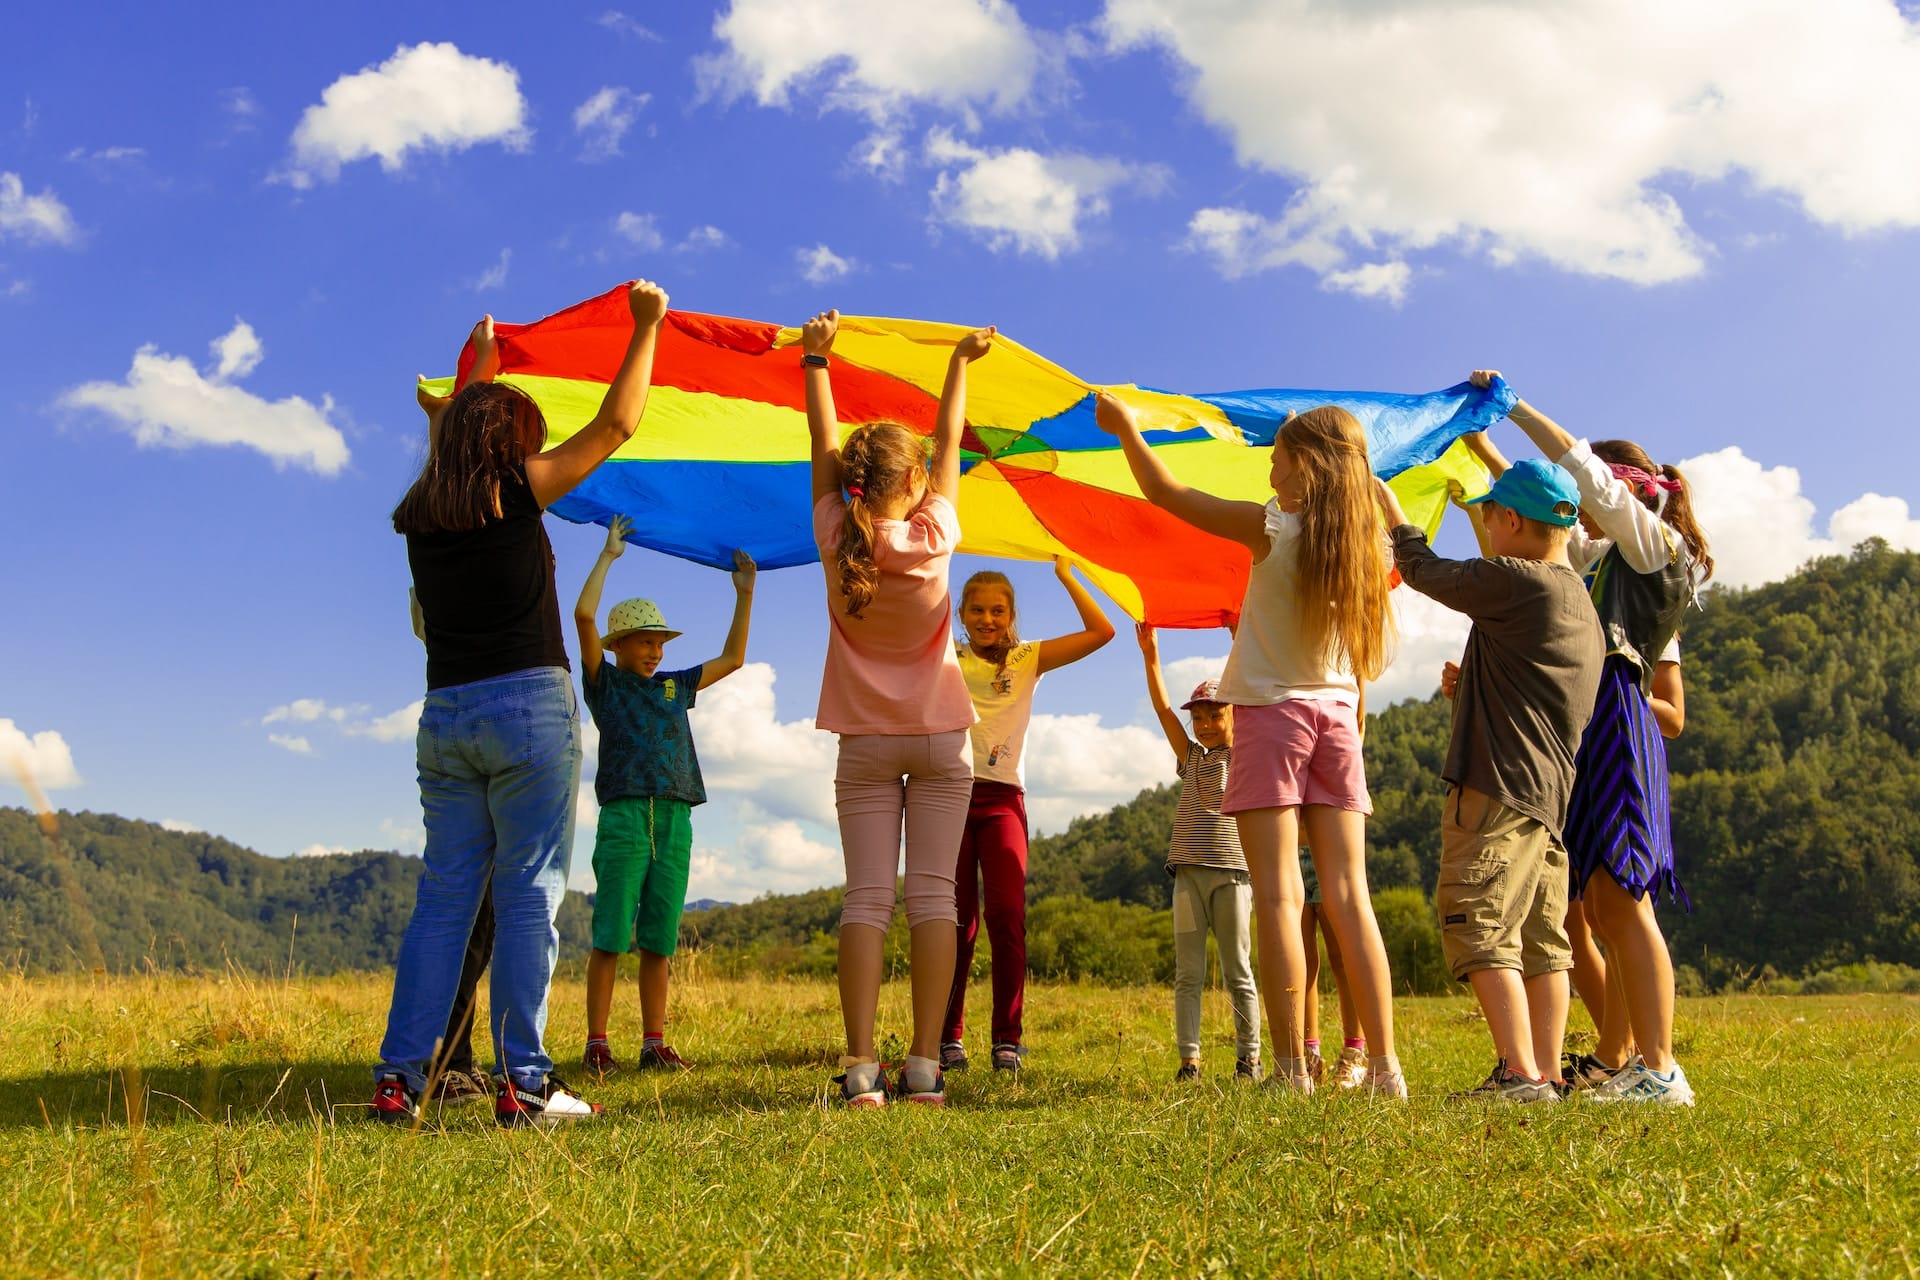 group of children lifting a parachute